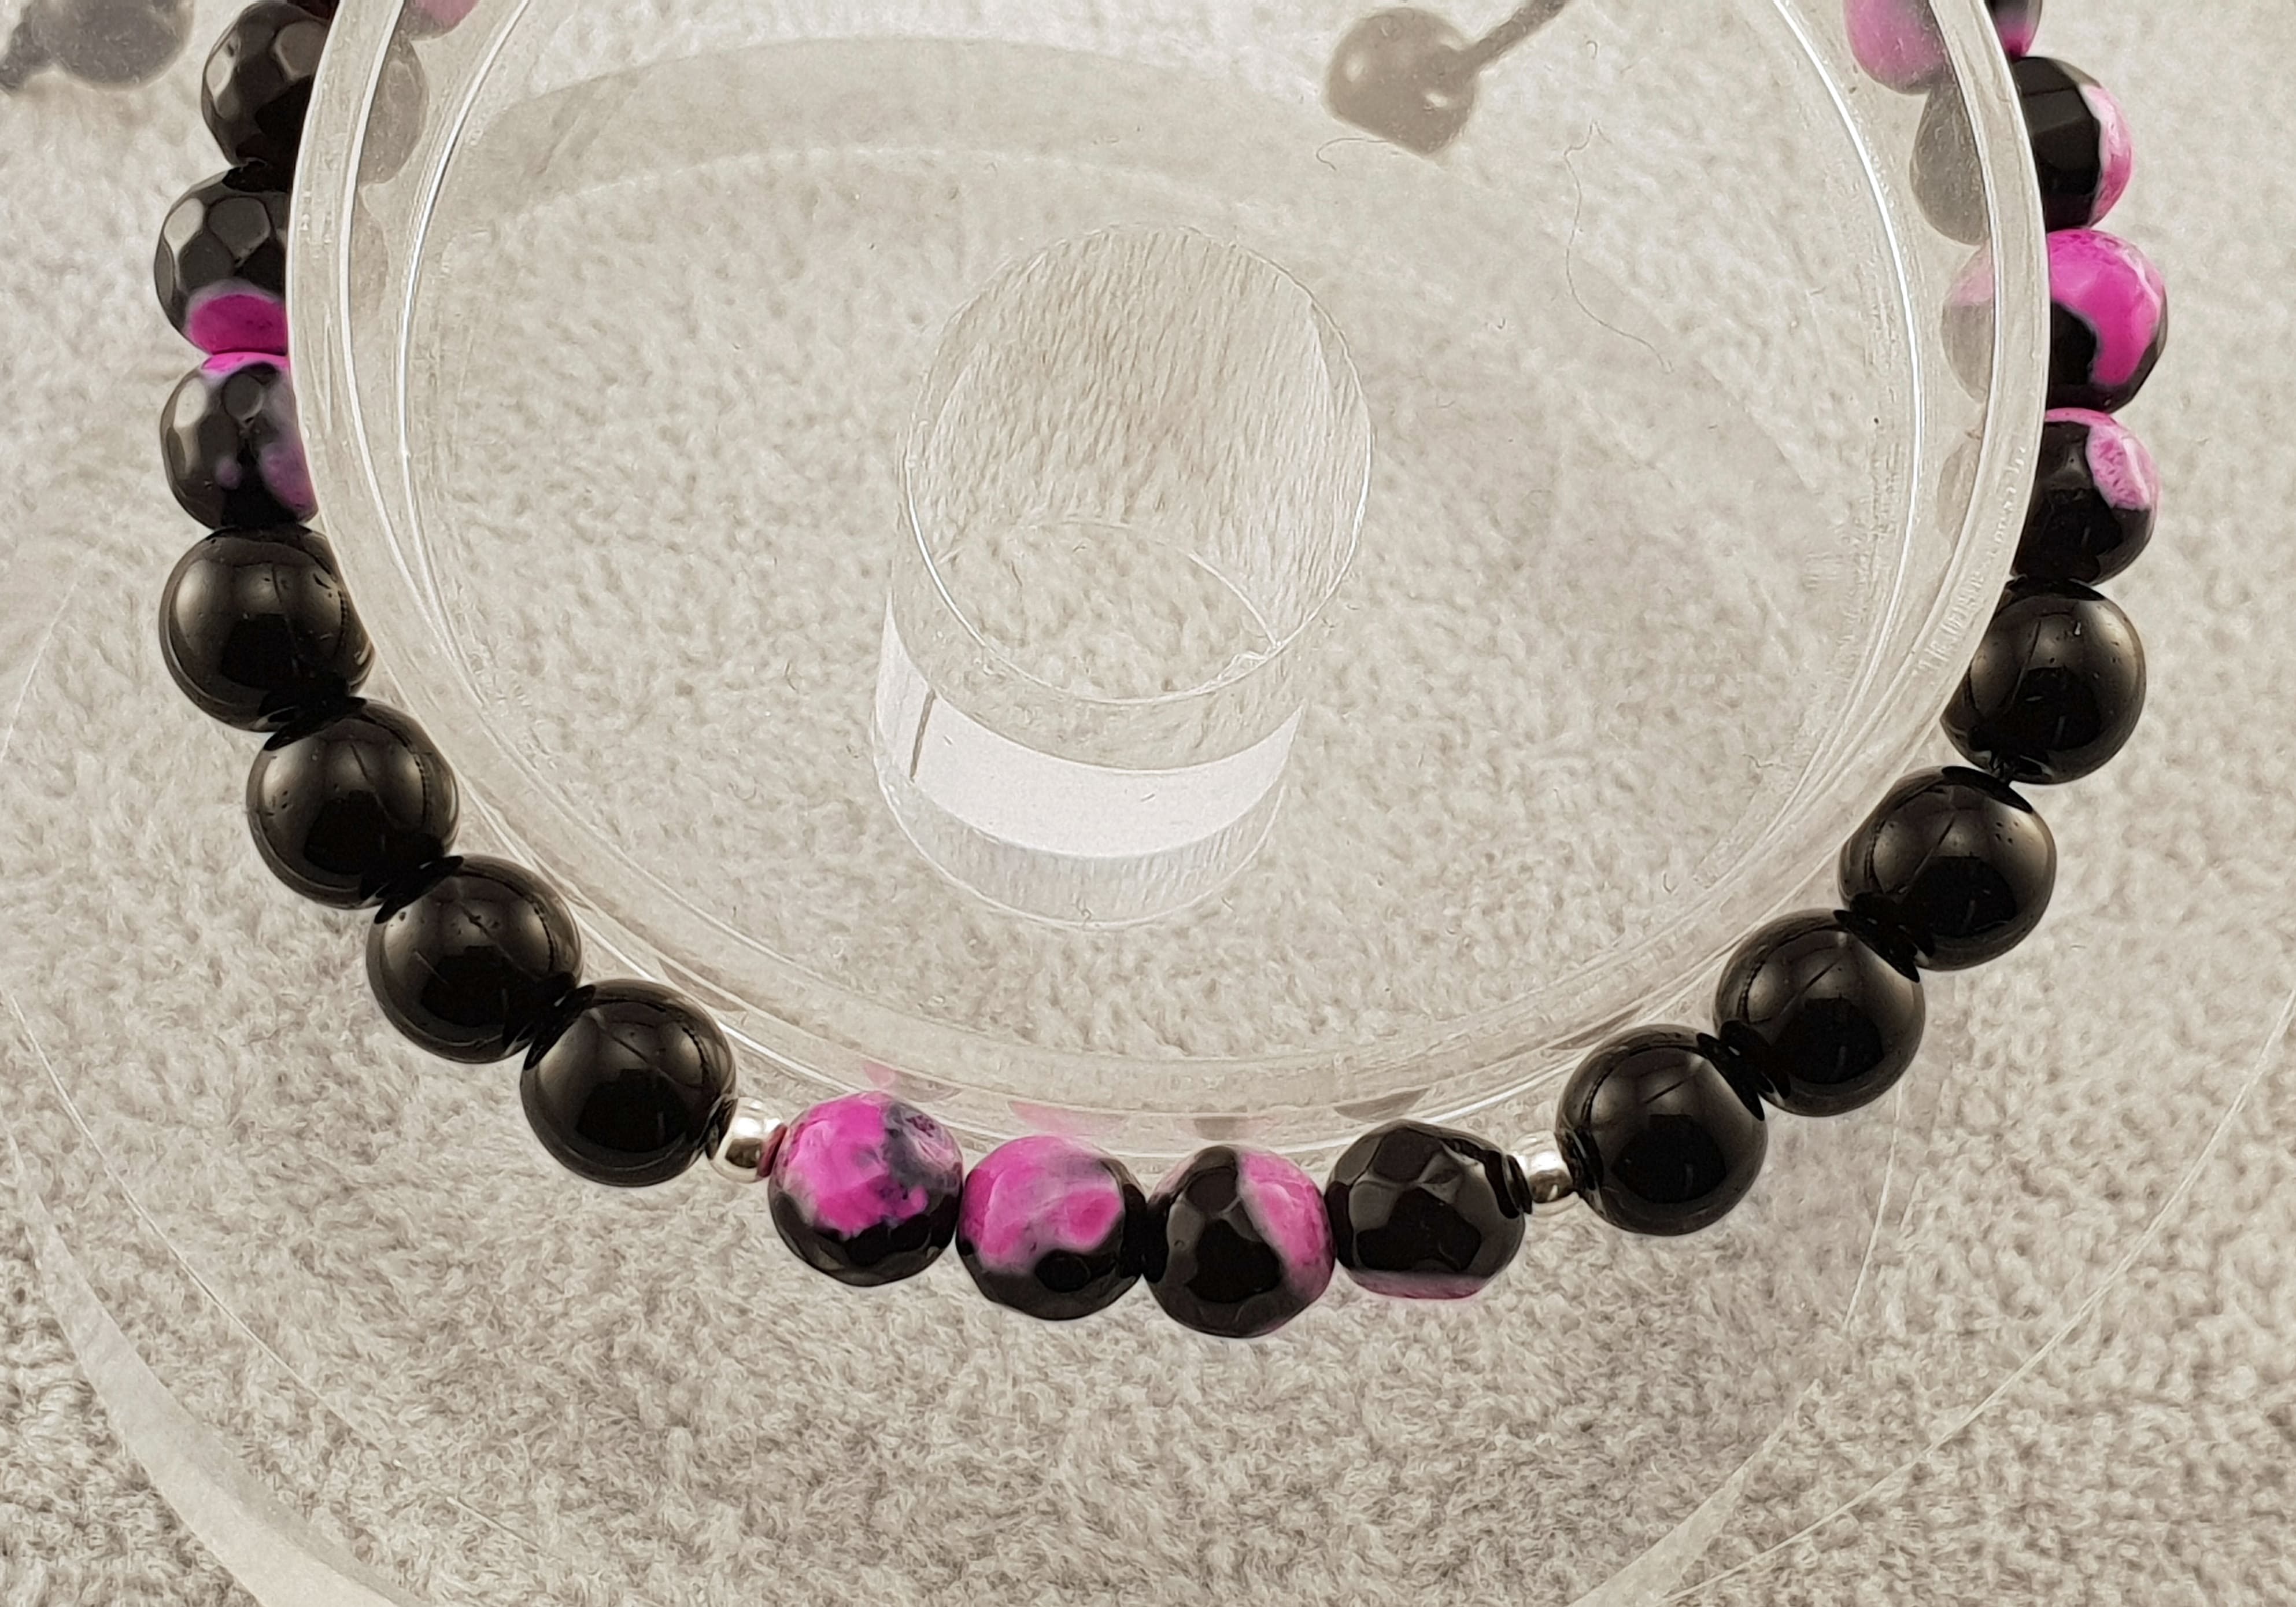 Agate beads - Black and Matte Violet - By Janine Jewellery